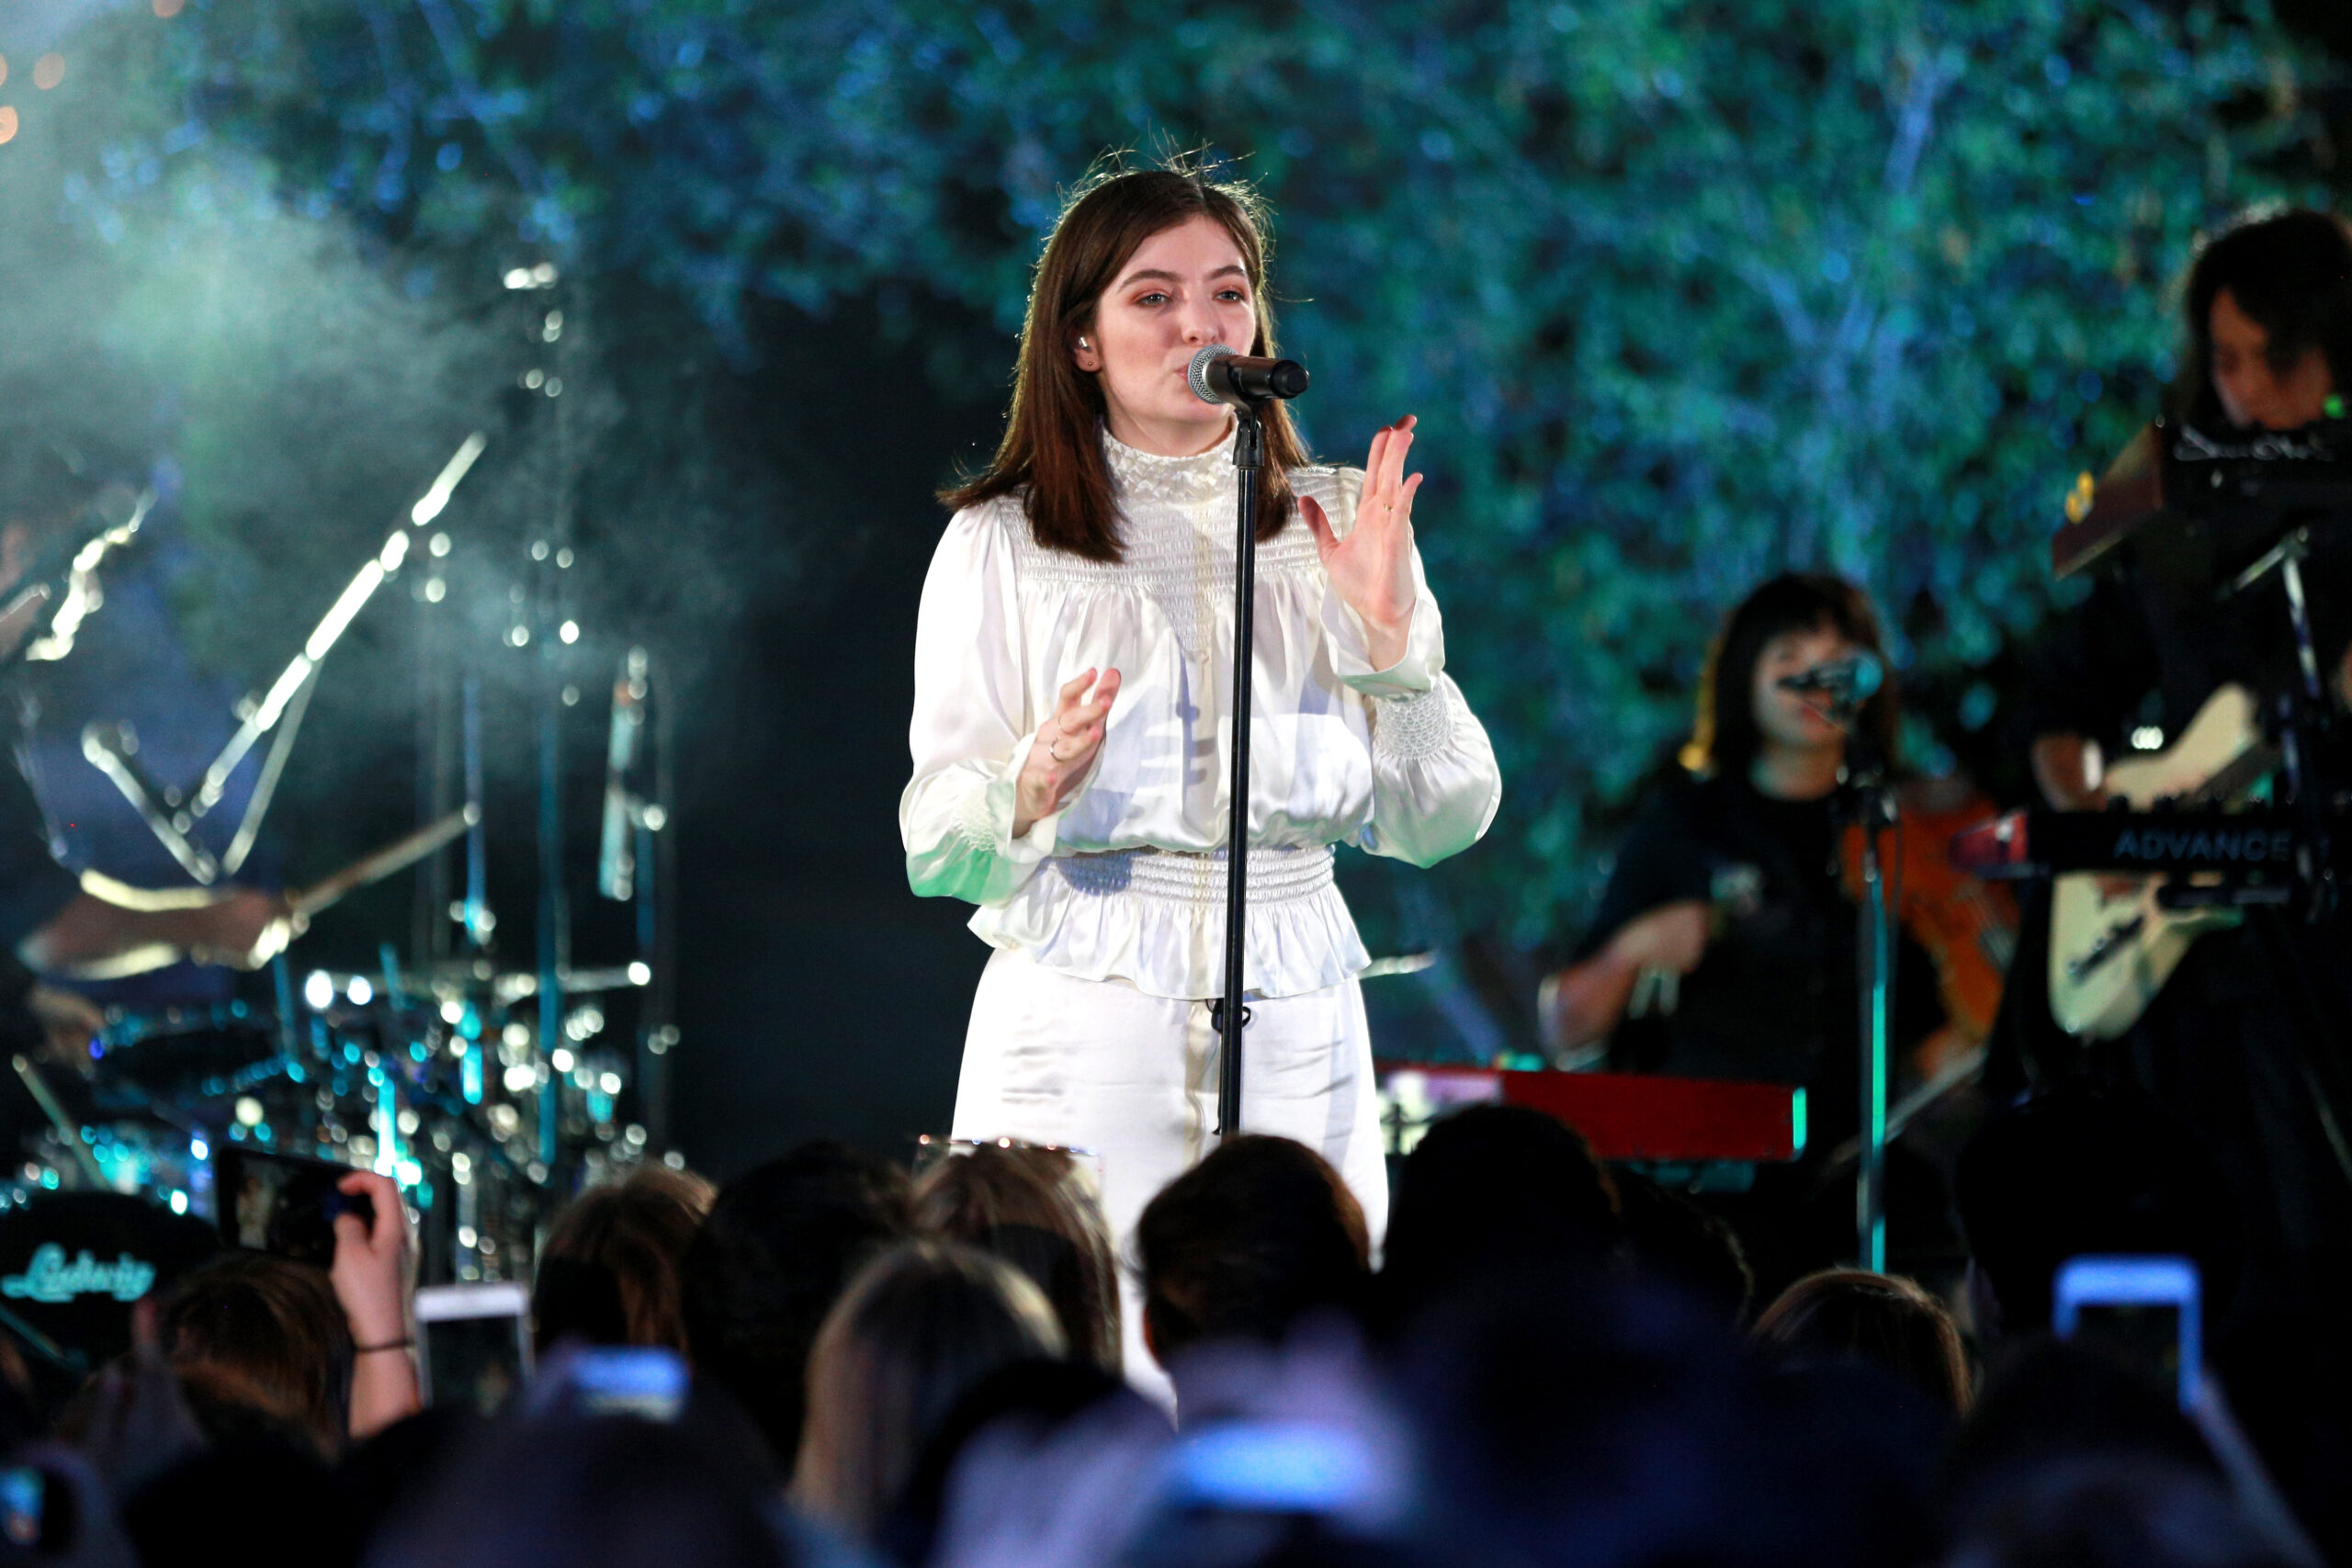 iHeartRadio Secret Sessions By AT&T Featuring Lorde At The Houdini Estate. Photo by: Rich Fury/Getty Images